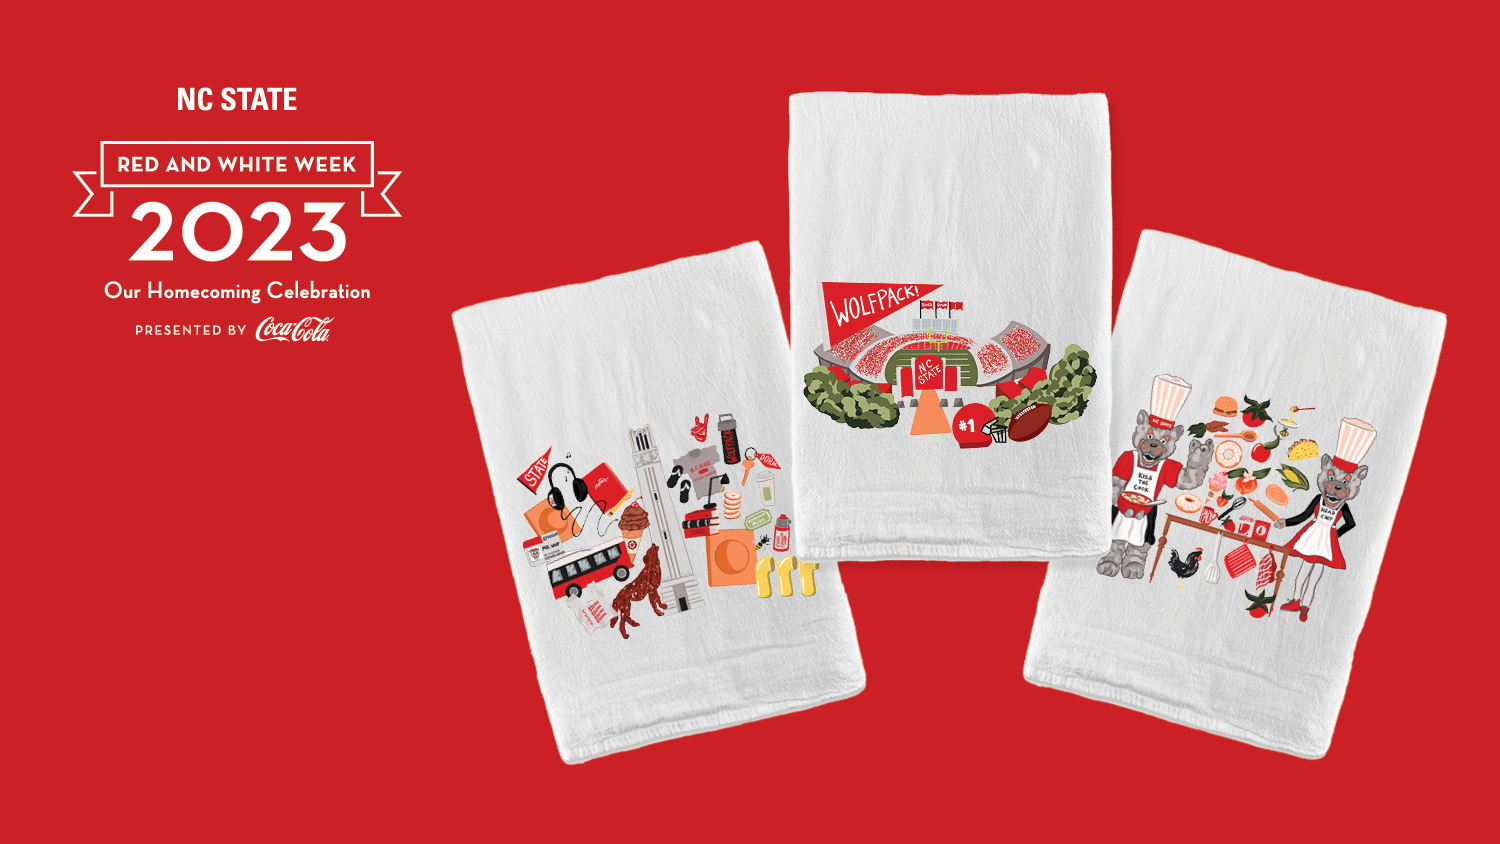 Three tea towels are displayed, each featuring different NC State-themed designs. One is a series of campus icons, one is Carter-Finley Stadium and one is Mr. and Ms. Wuf cooking.